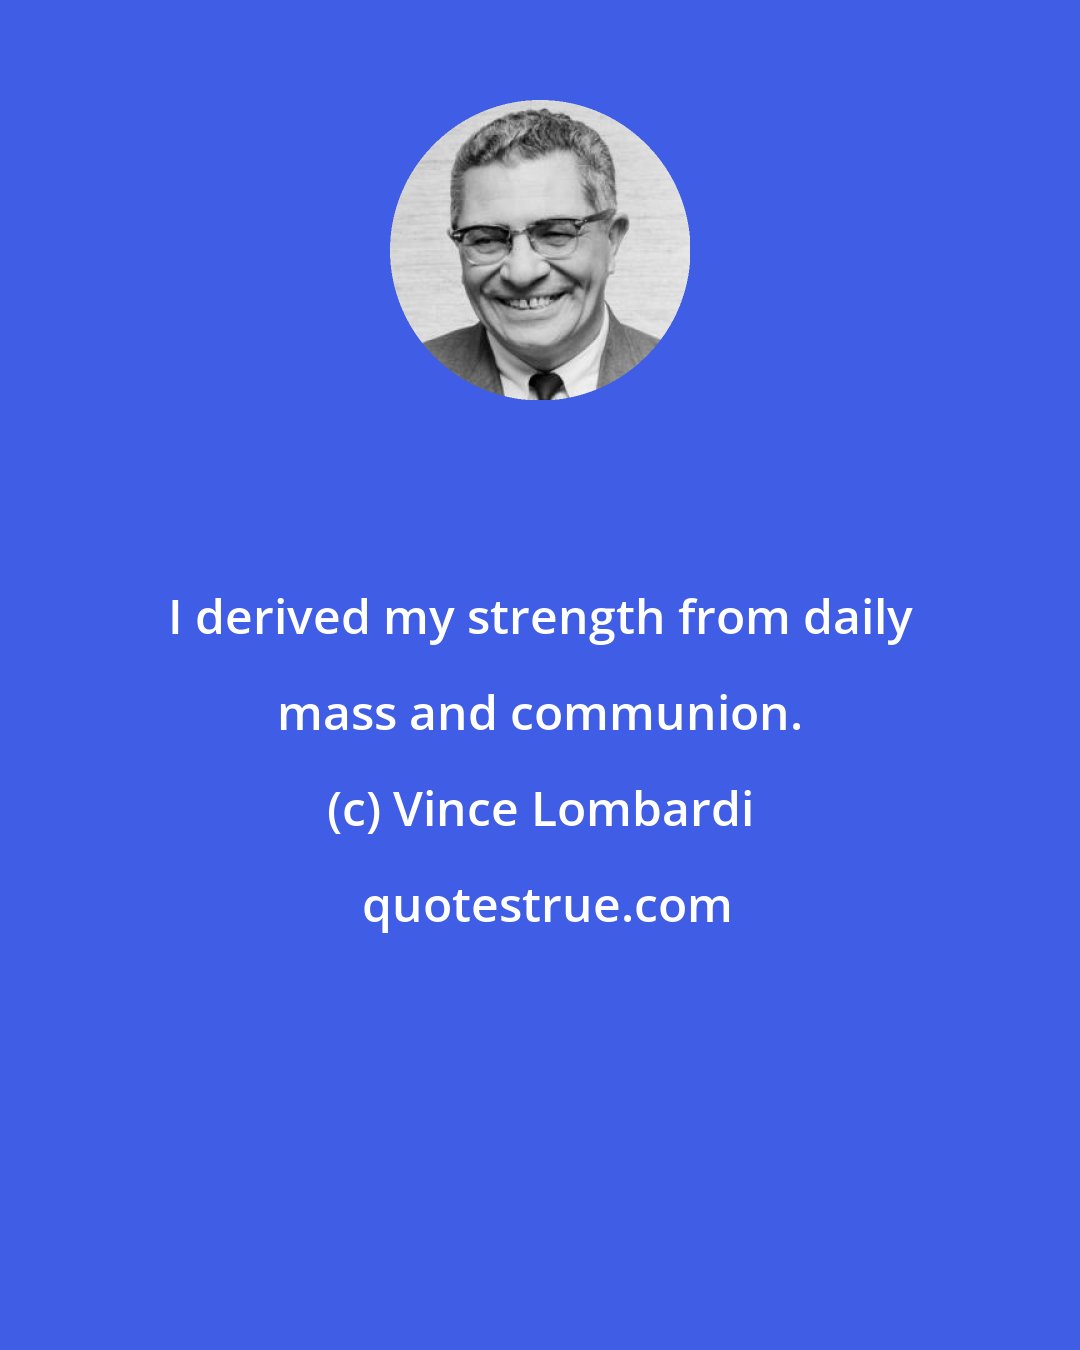 Vince Lombardi: I derived my strength from daily mass and communion.